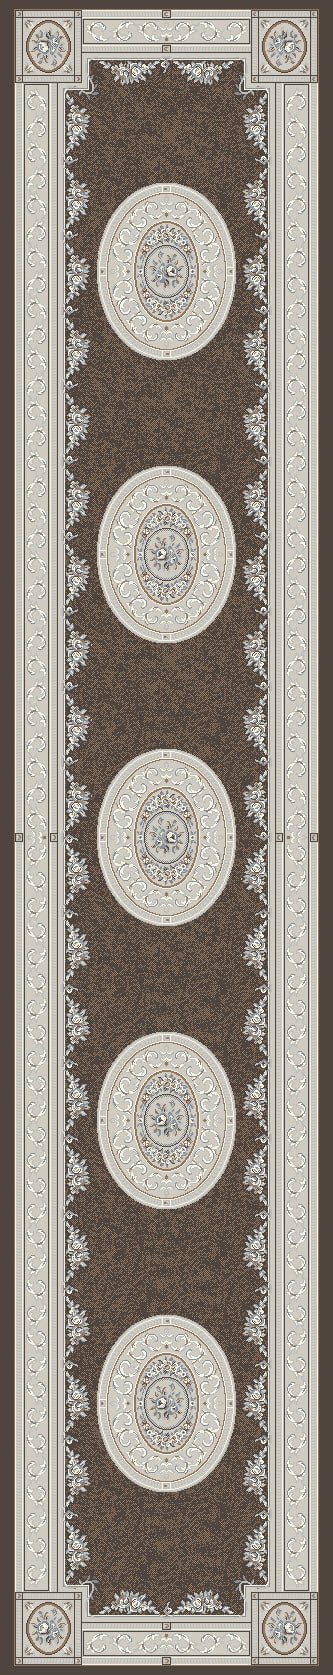 Dynamic Area Rugs Ancient Garden Area Rugs 57226-3295 Brown Poly 12 Sizes Belgium